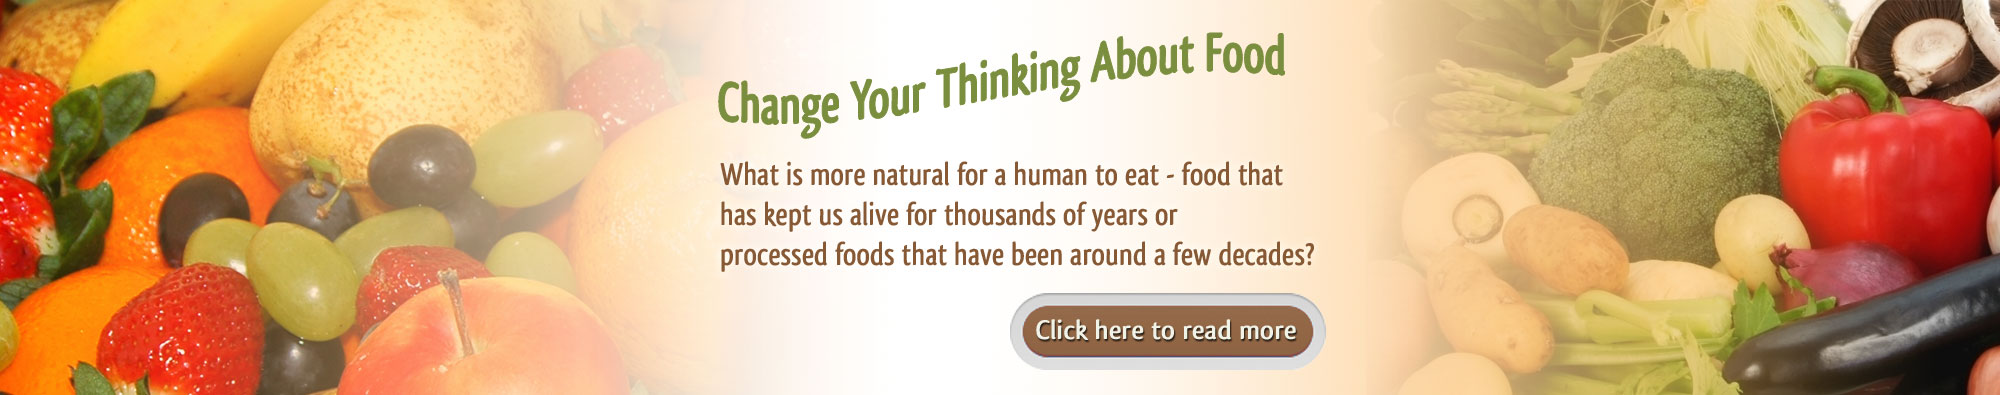 Change Your Thinking About Food